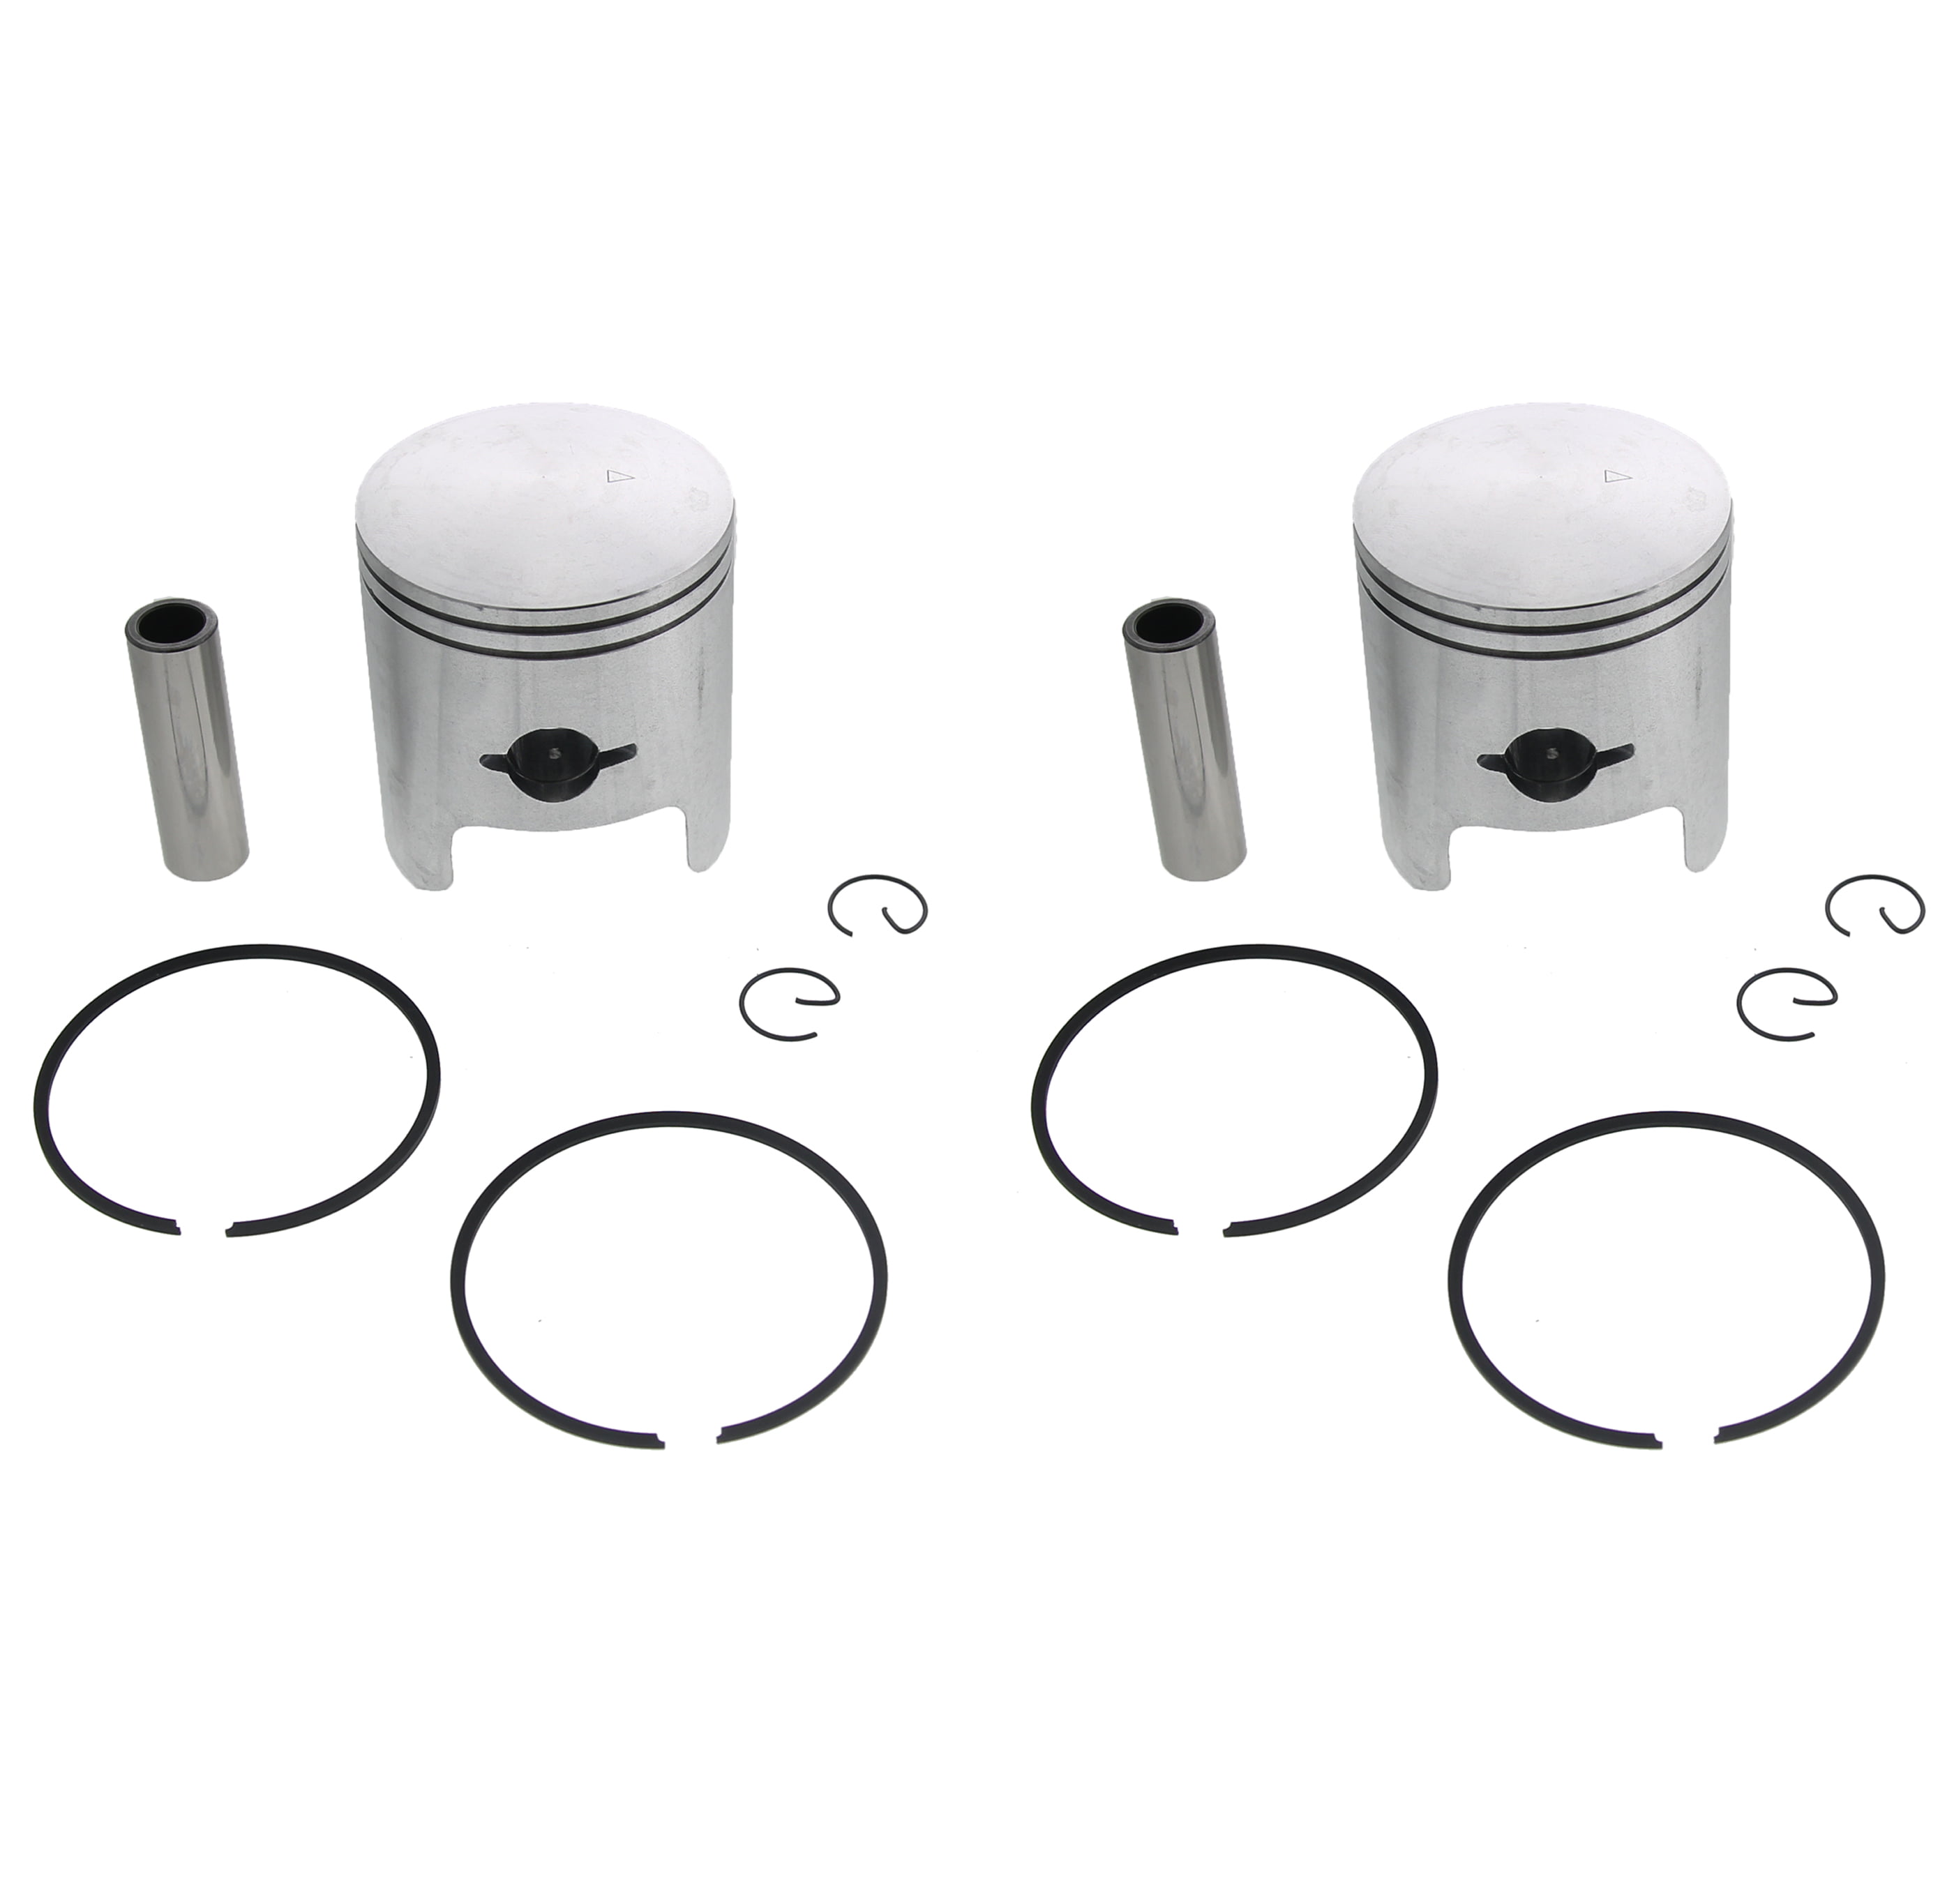 Piston Kit fits Arctic Cat Prowler 440 Mountain Cat 1991 1992 by Race-Driven x2 